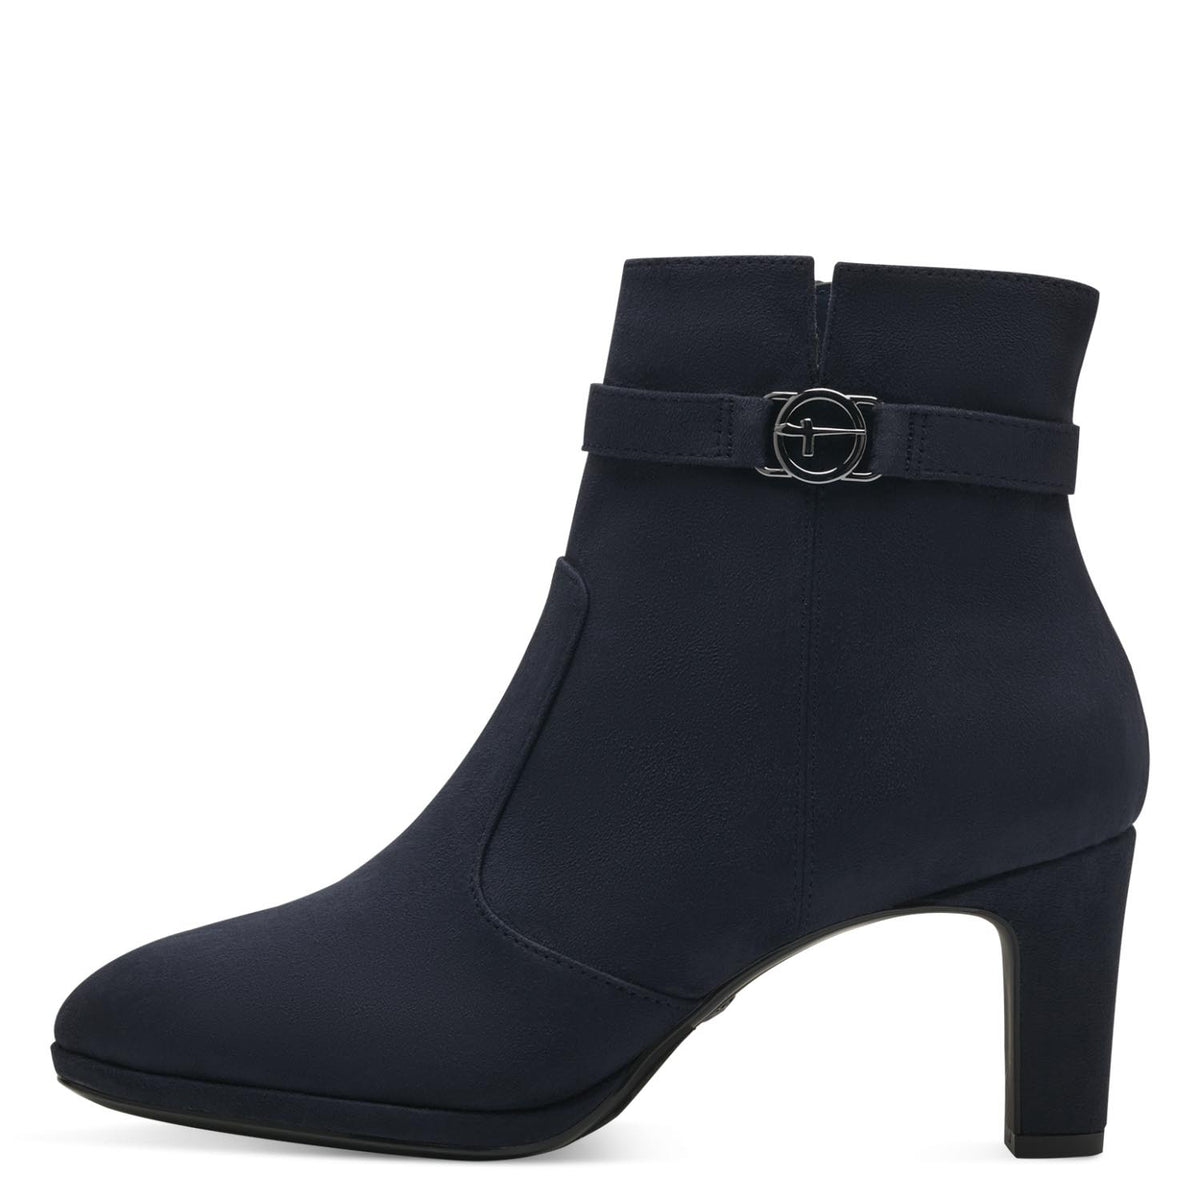 Front view of Tamaris Dressy Navy Thick Heel Boots.